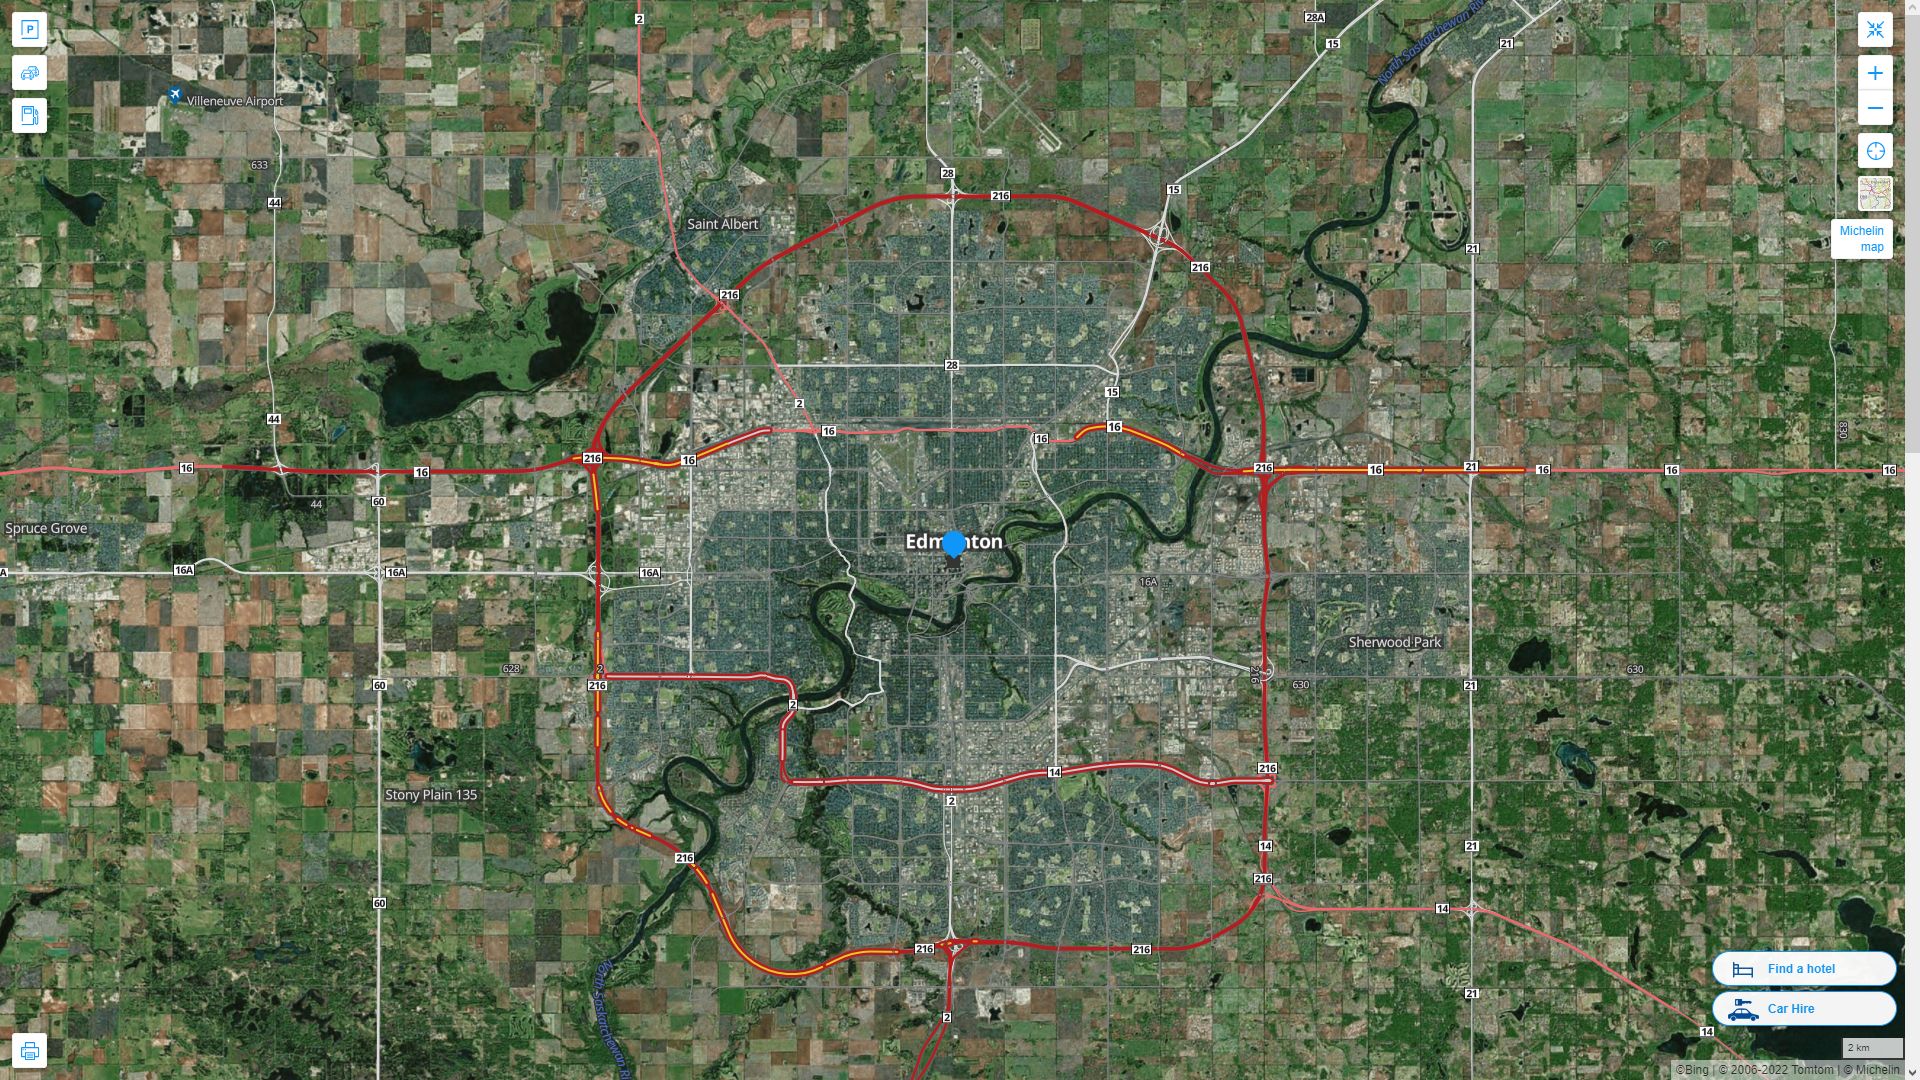 Edmonton Highway and Road Map with Satellite View